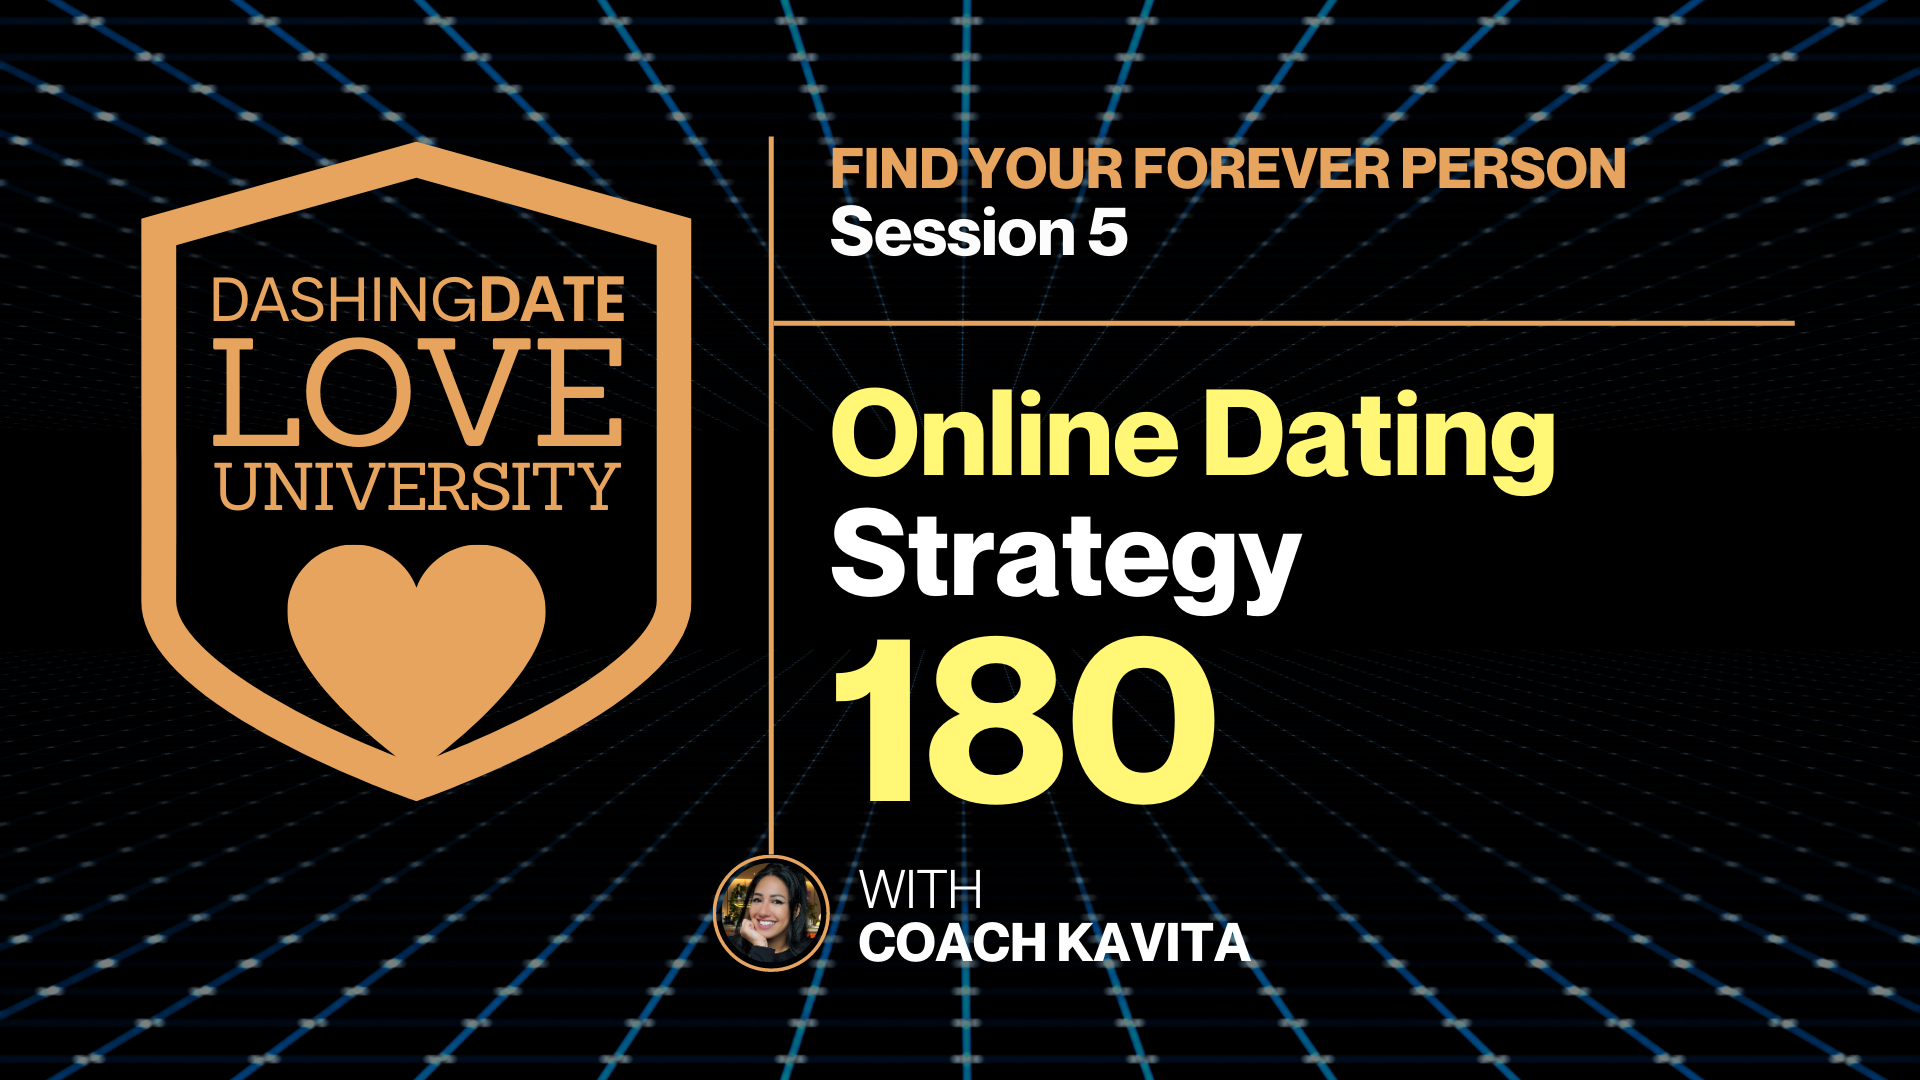 Session 5 Online Dating Strategy 180